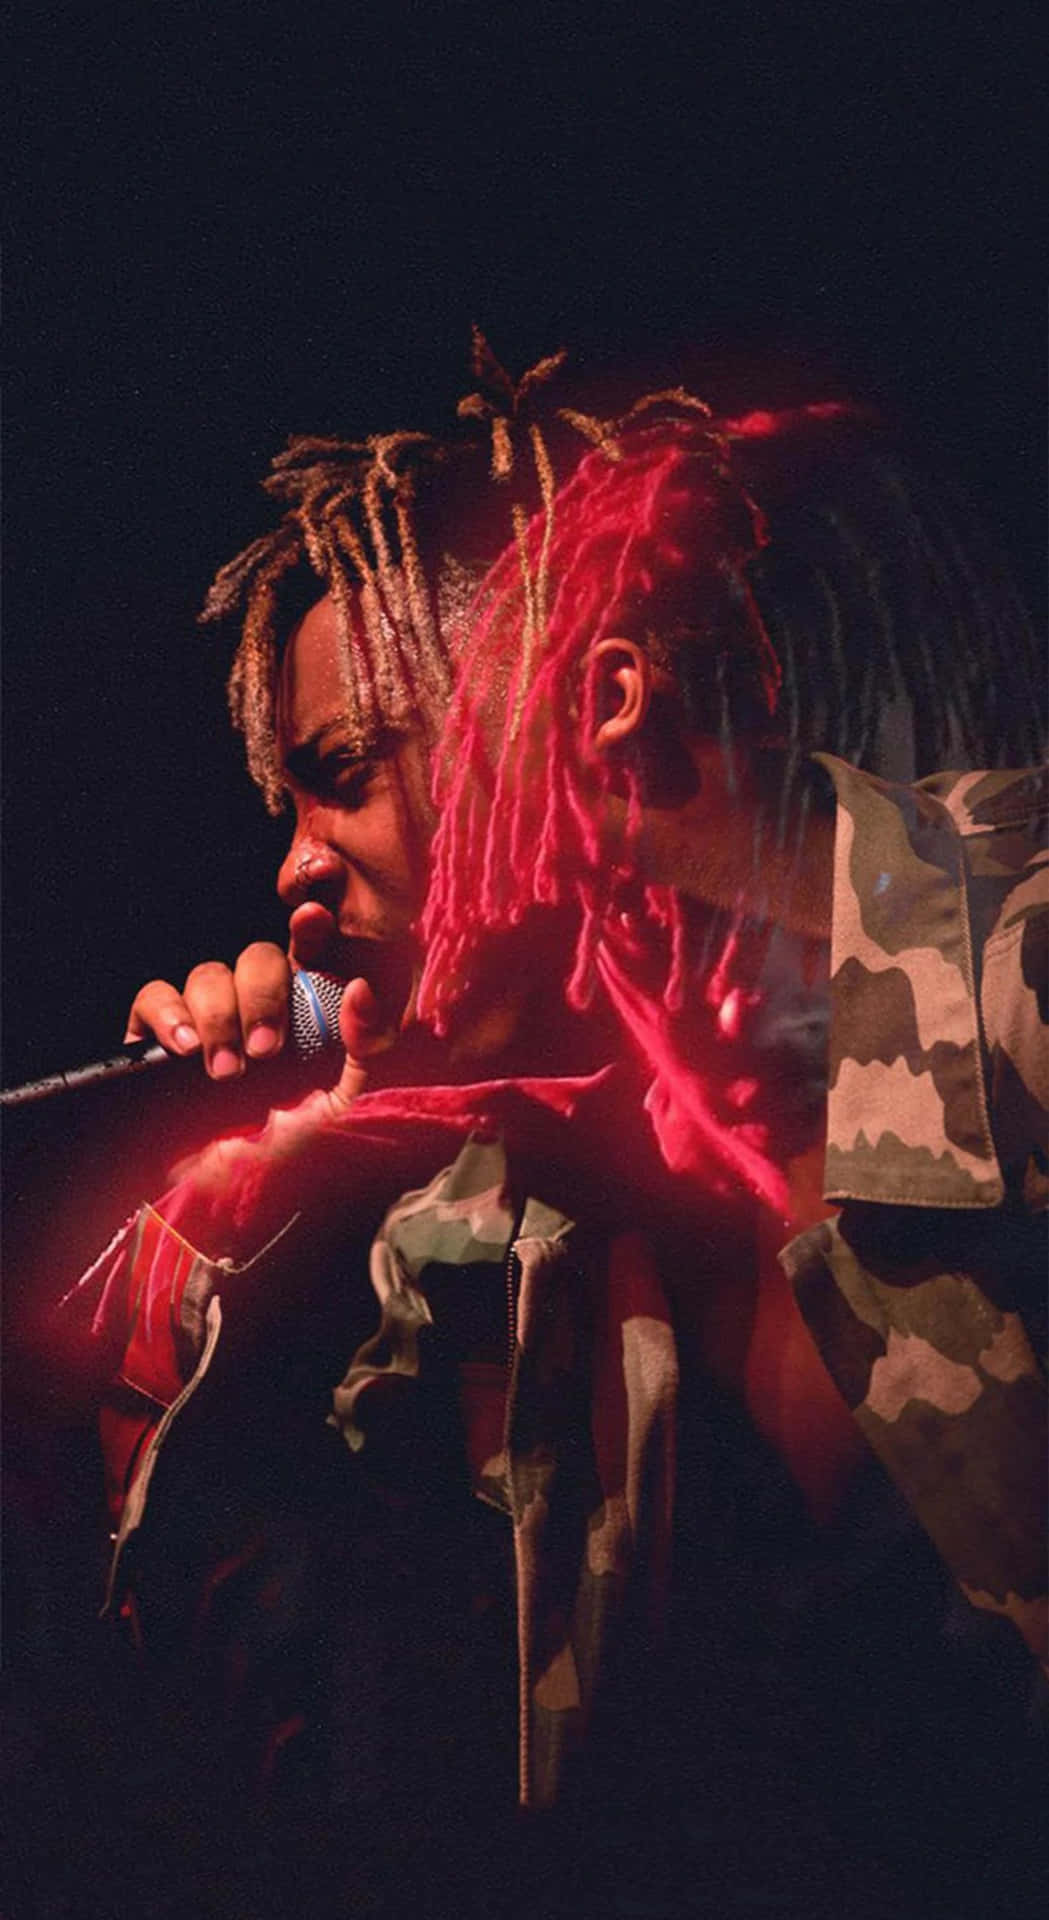 Juice Wrld photographed in his signature style